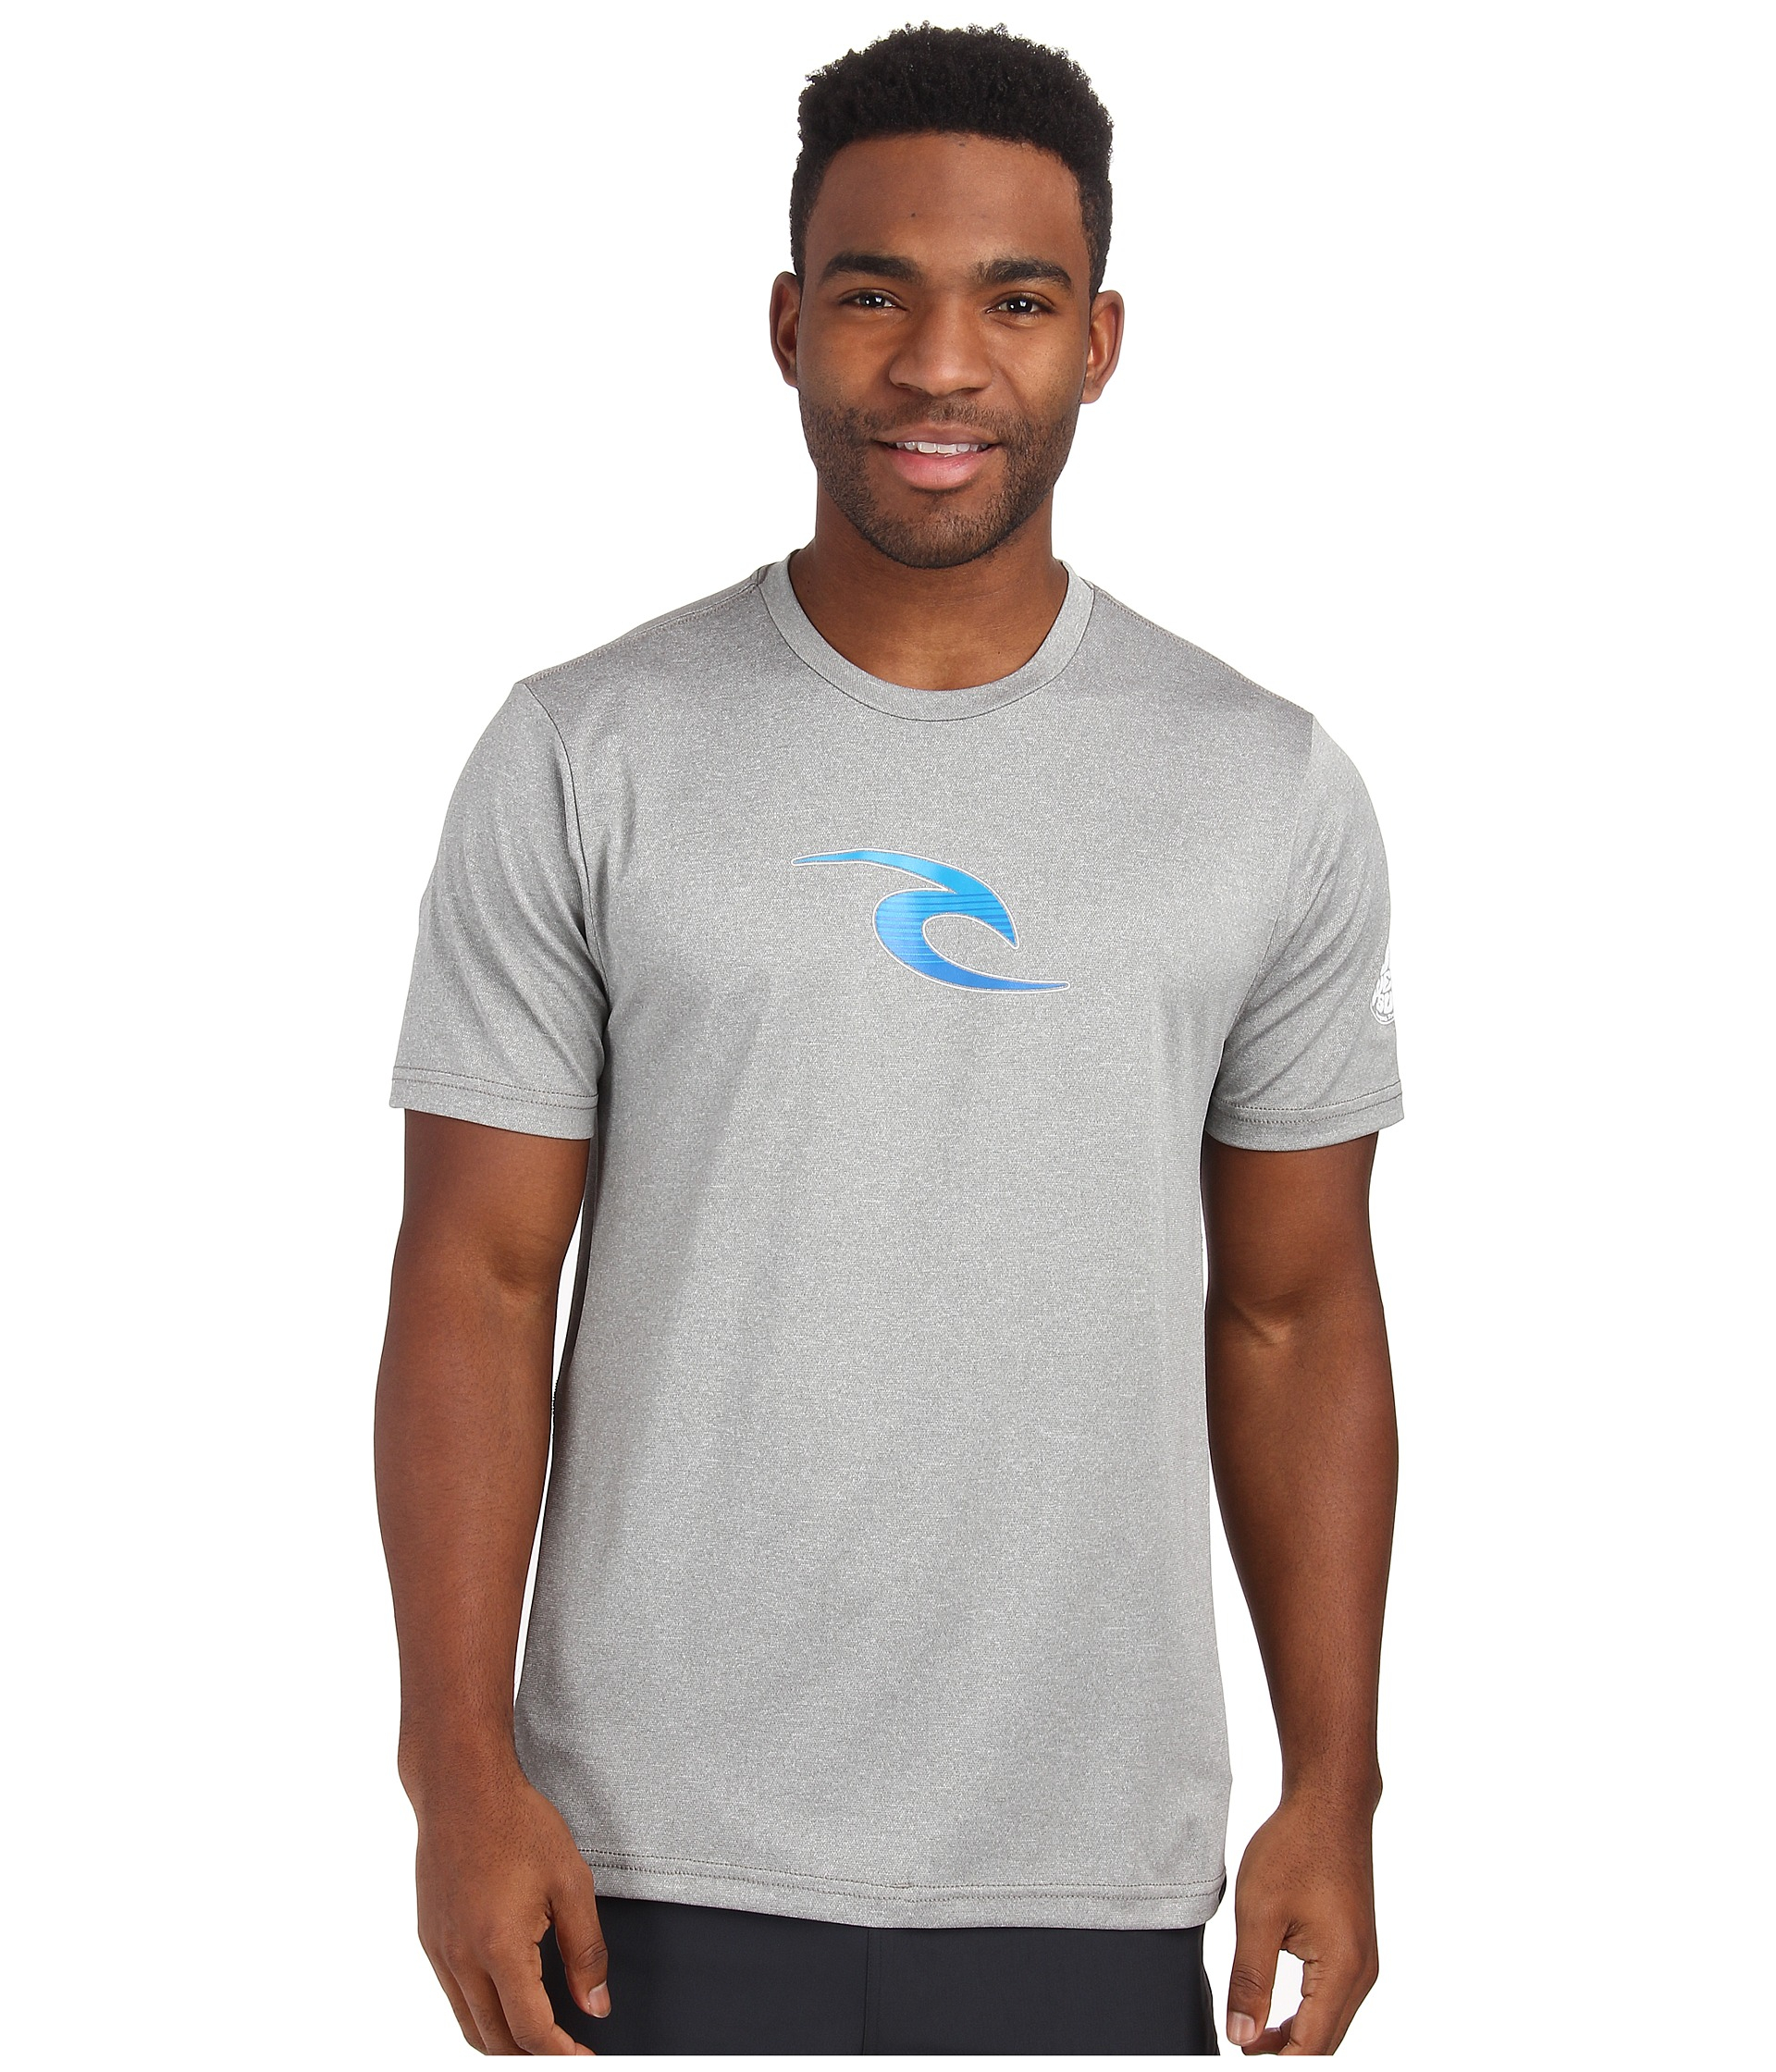 Lyst - Rip Curl Corp Short Sleeve Surf Shirt in Gray for Men